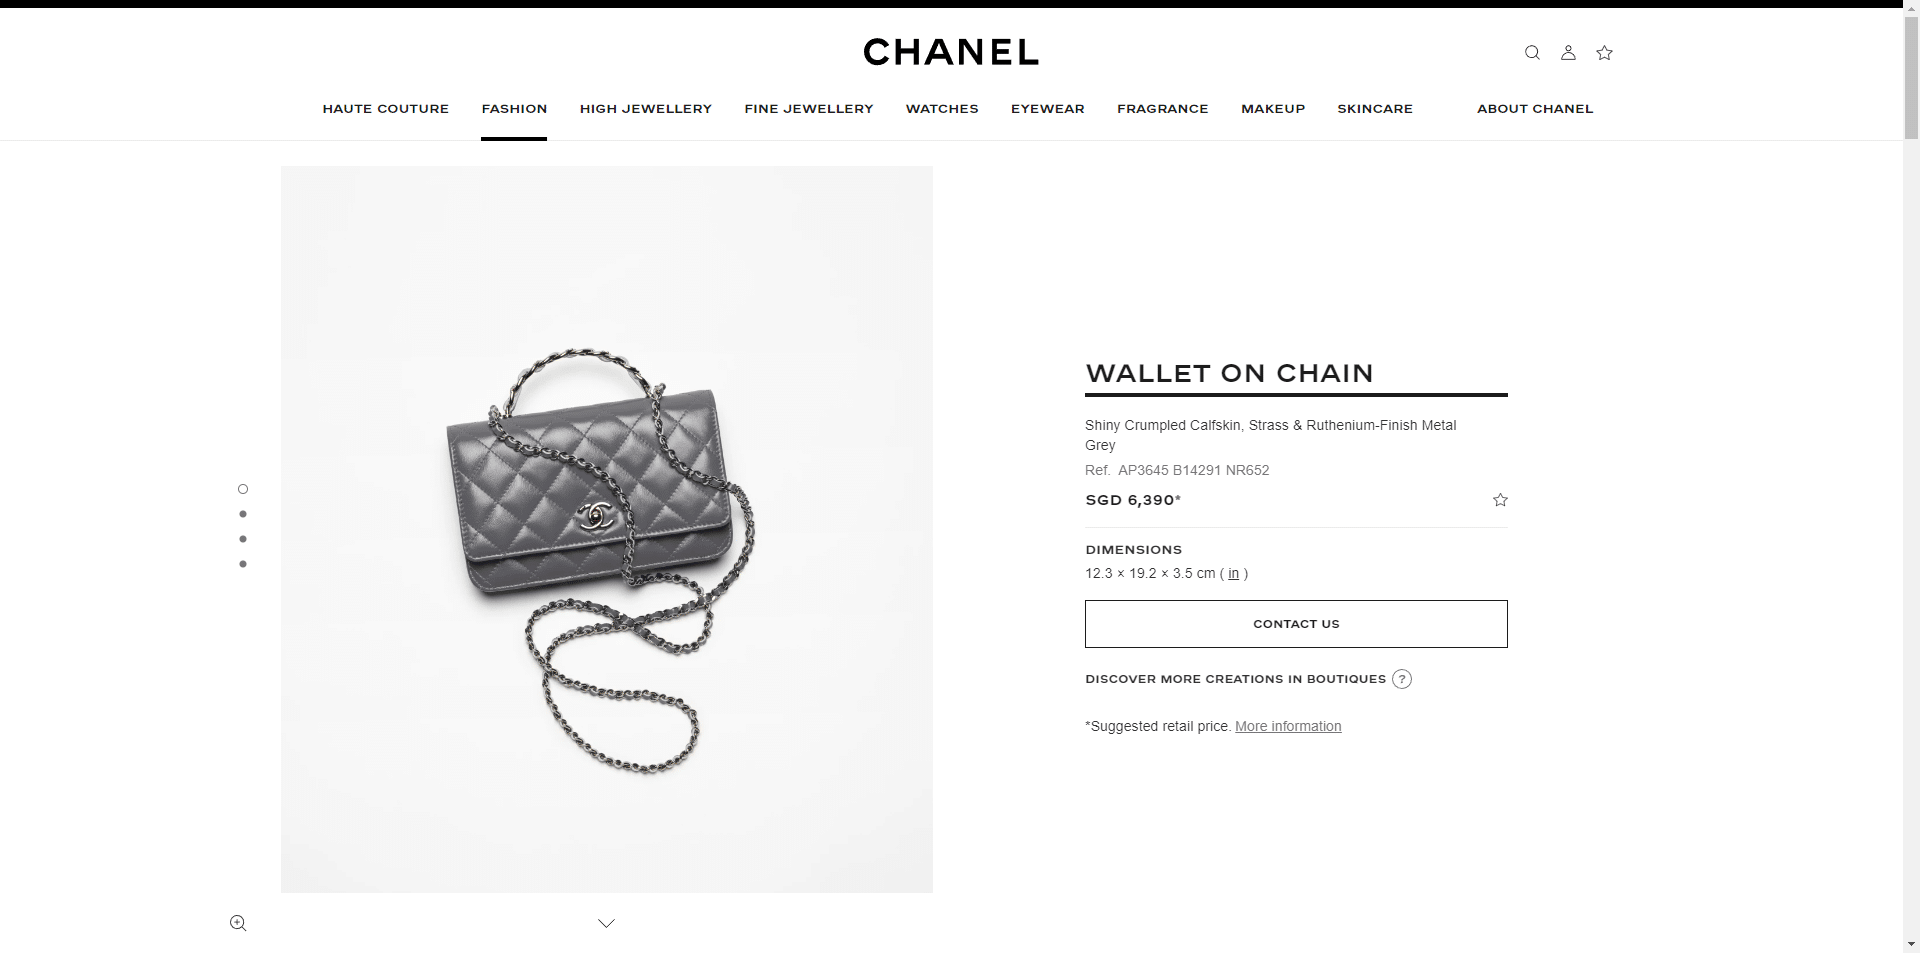 Wallet-on-chain-Shiny-crumpled-calfskin-strass-ruthenium-finish-metal-grey--Fashion-CHANEL.png